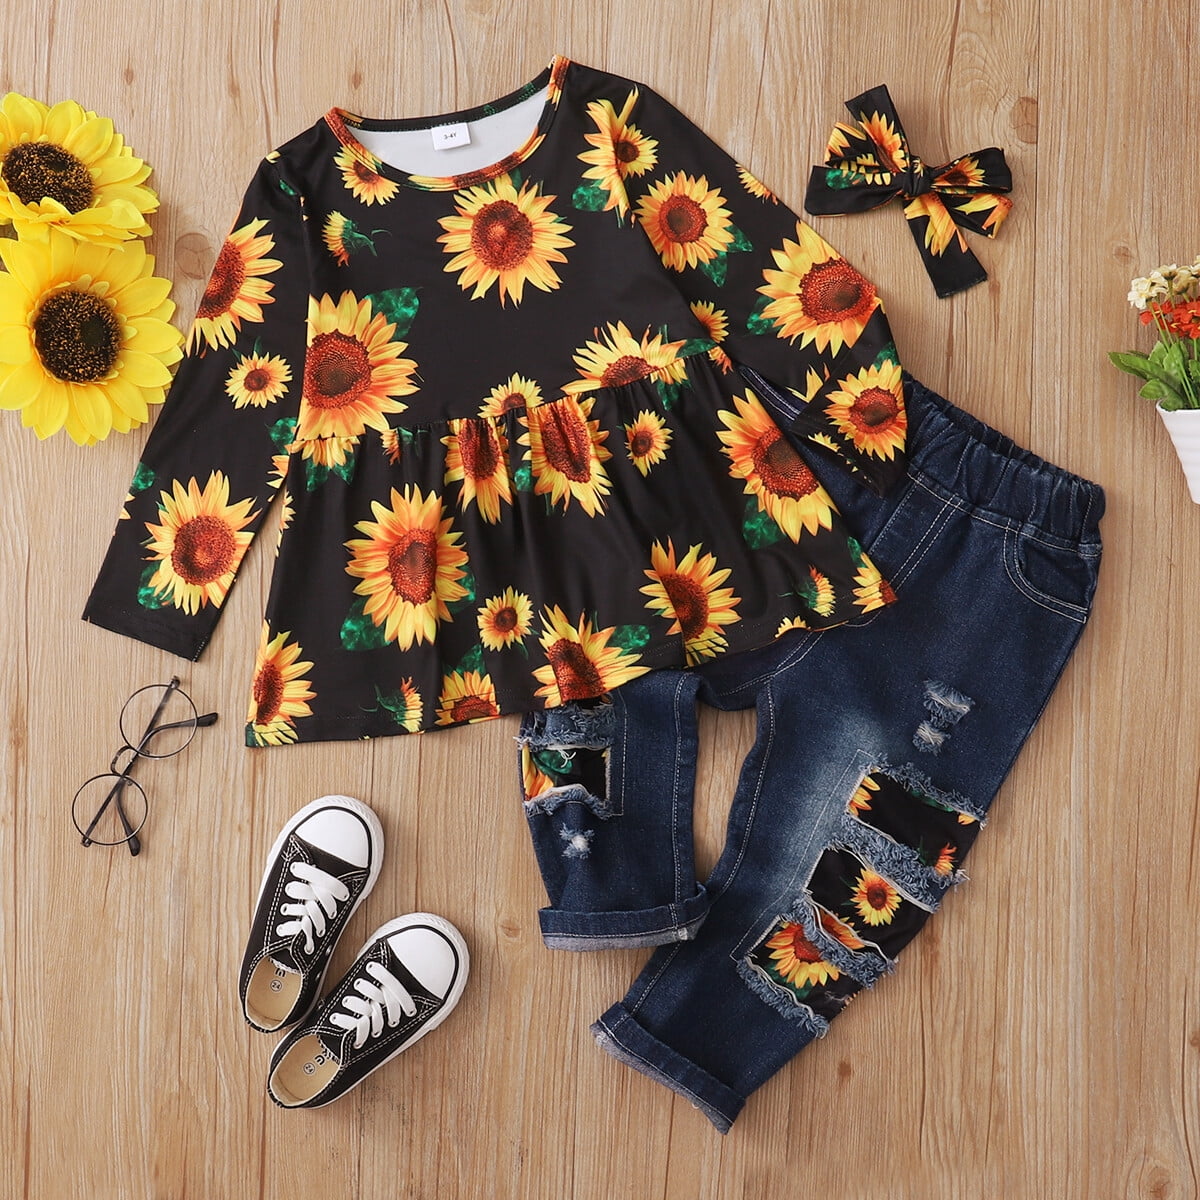  Hipea Girls Clothes Girl Fall Outfits Sunflower Off